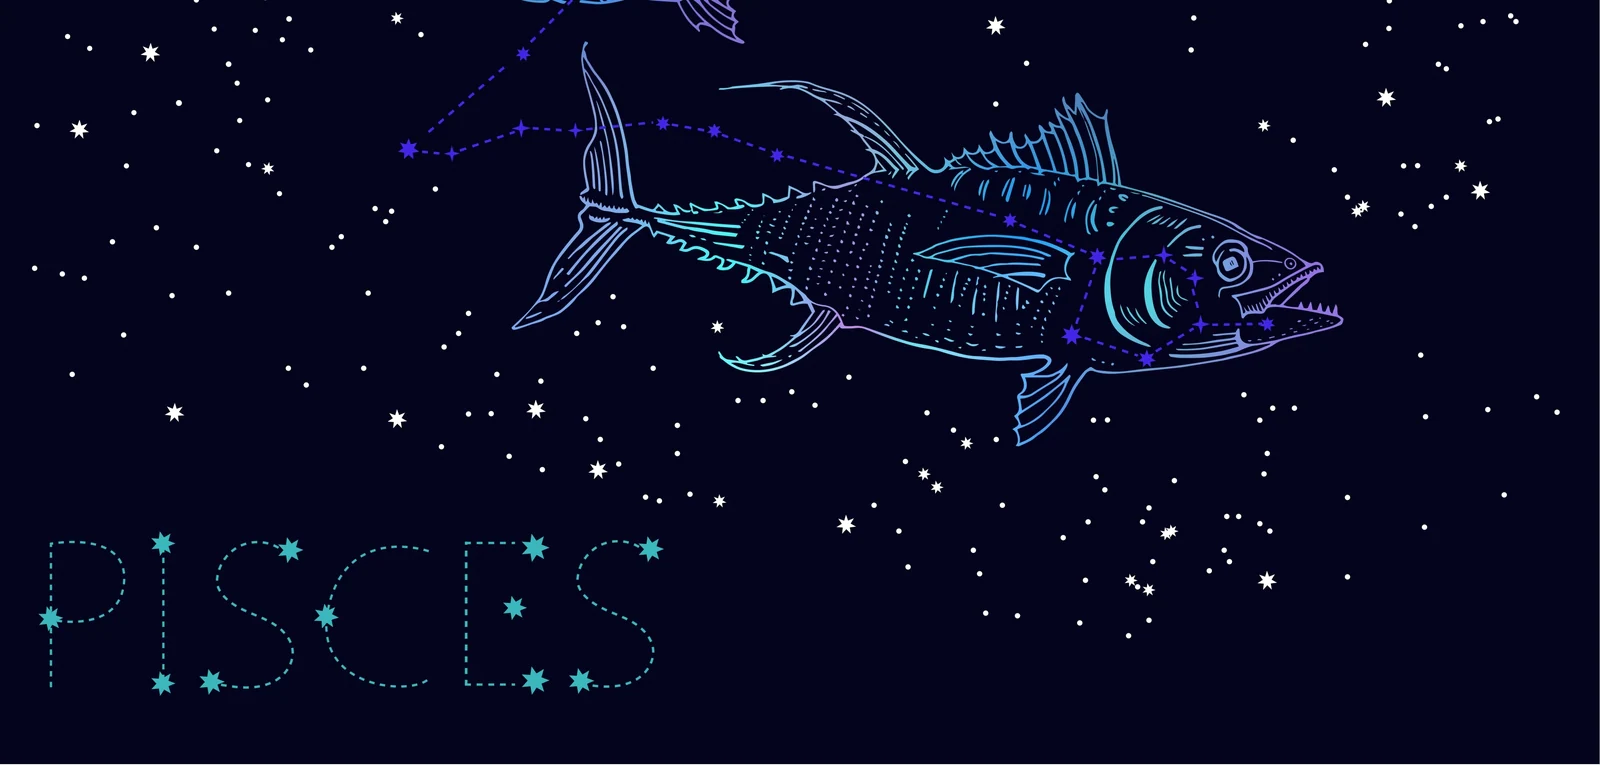 Pisces Horoscope predictions for March 19: Try to simplify your schedule today